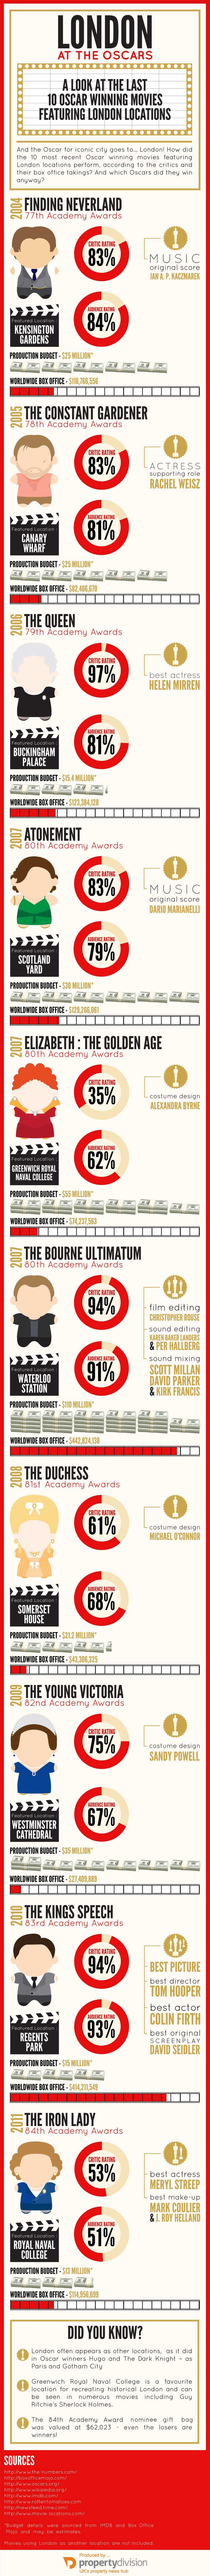 London at the Oscars - Infographic